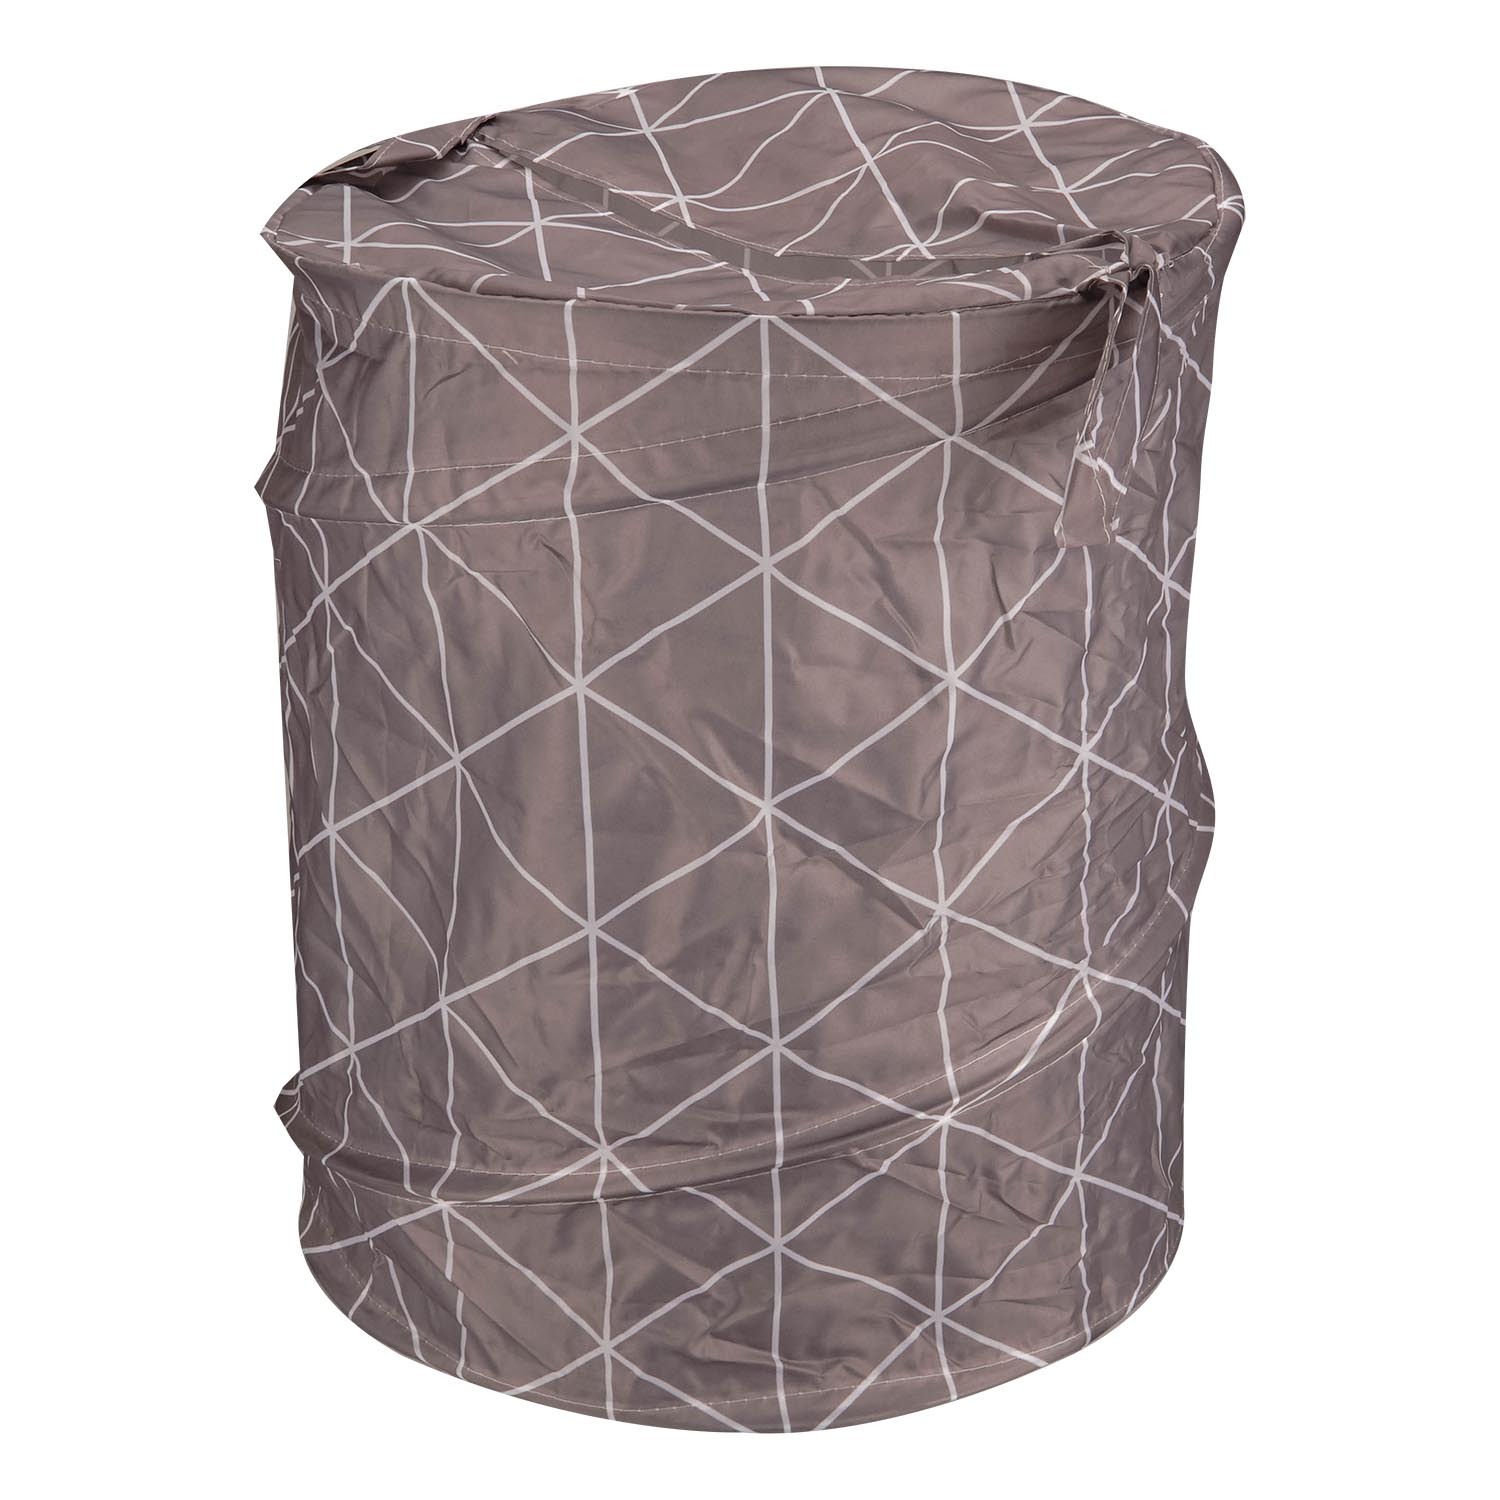 Single Grey Geometric Pop Up Laundry Hamper in Assorted styles Image 1